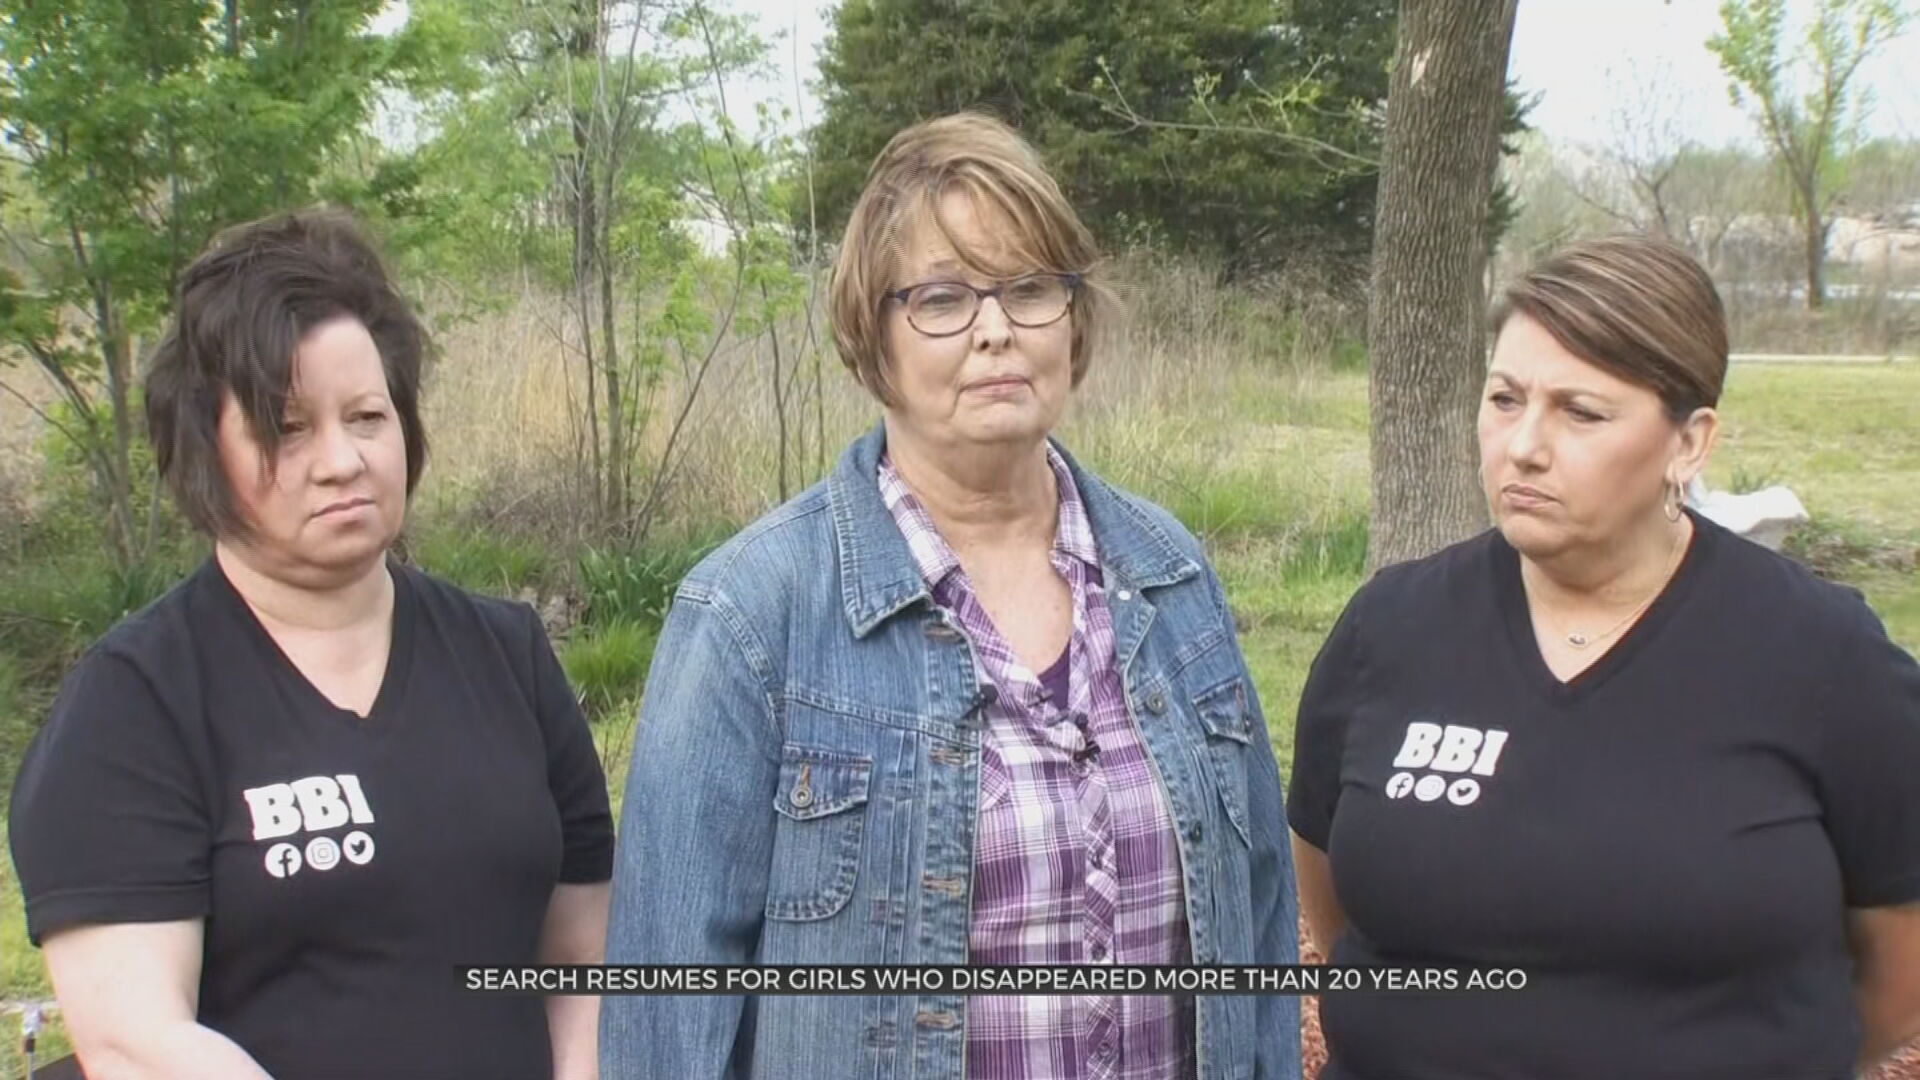 New Search At Picher Property Offers Family Of 2 Missing Welch Girls Renewed Hope 